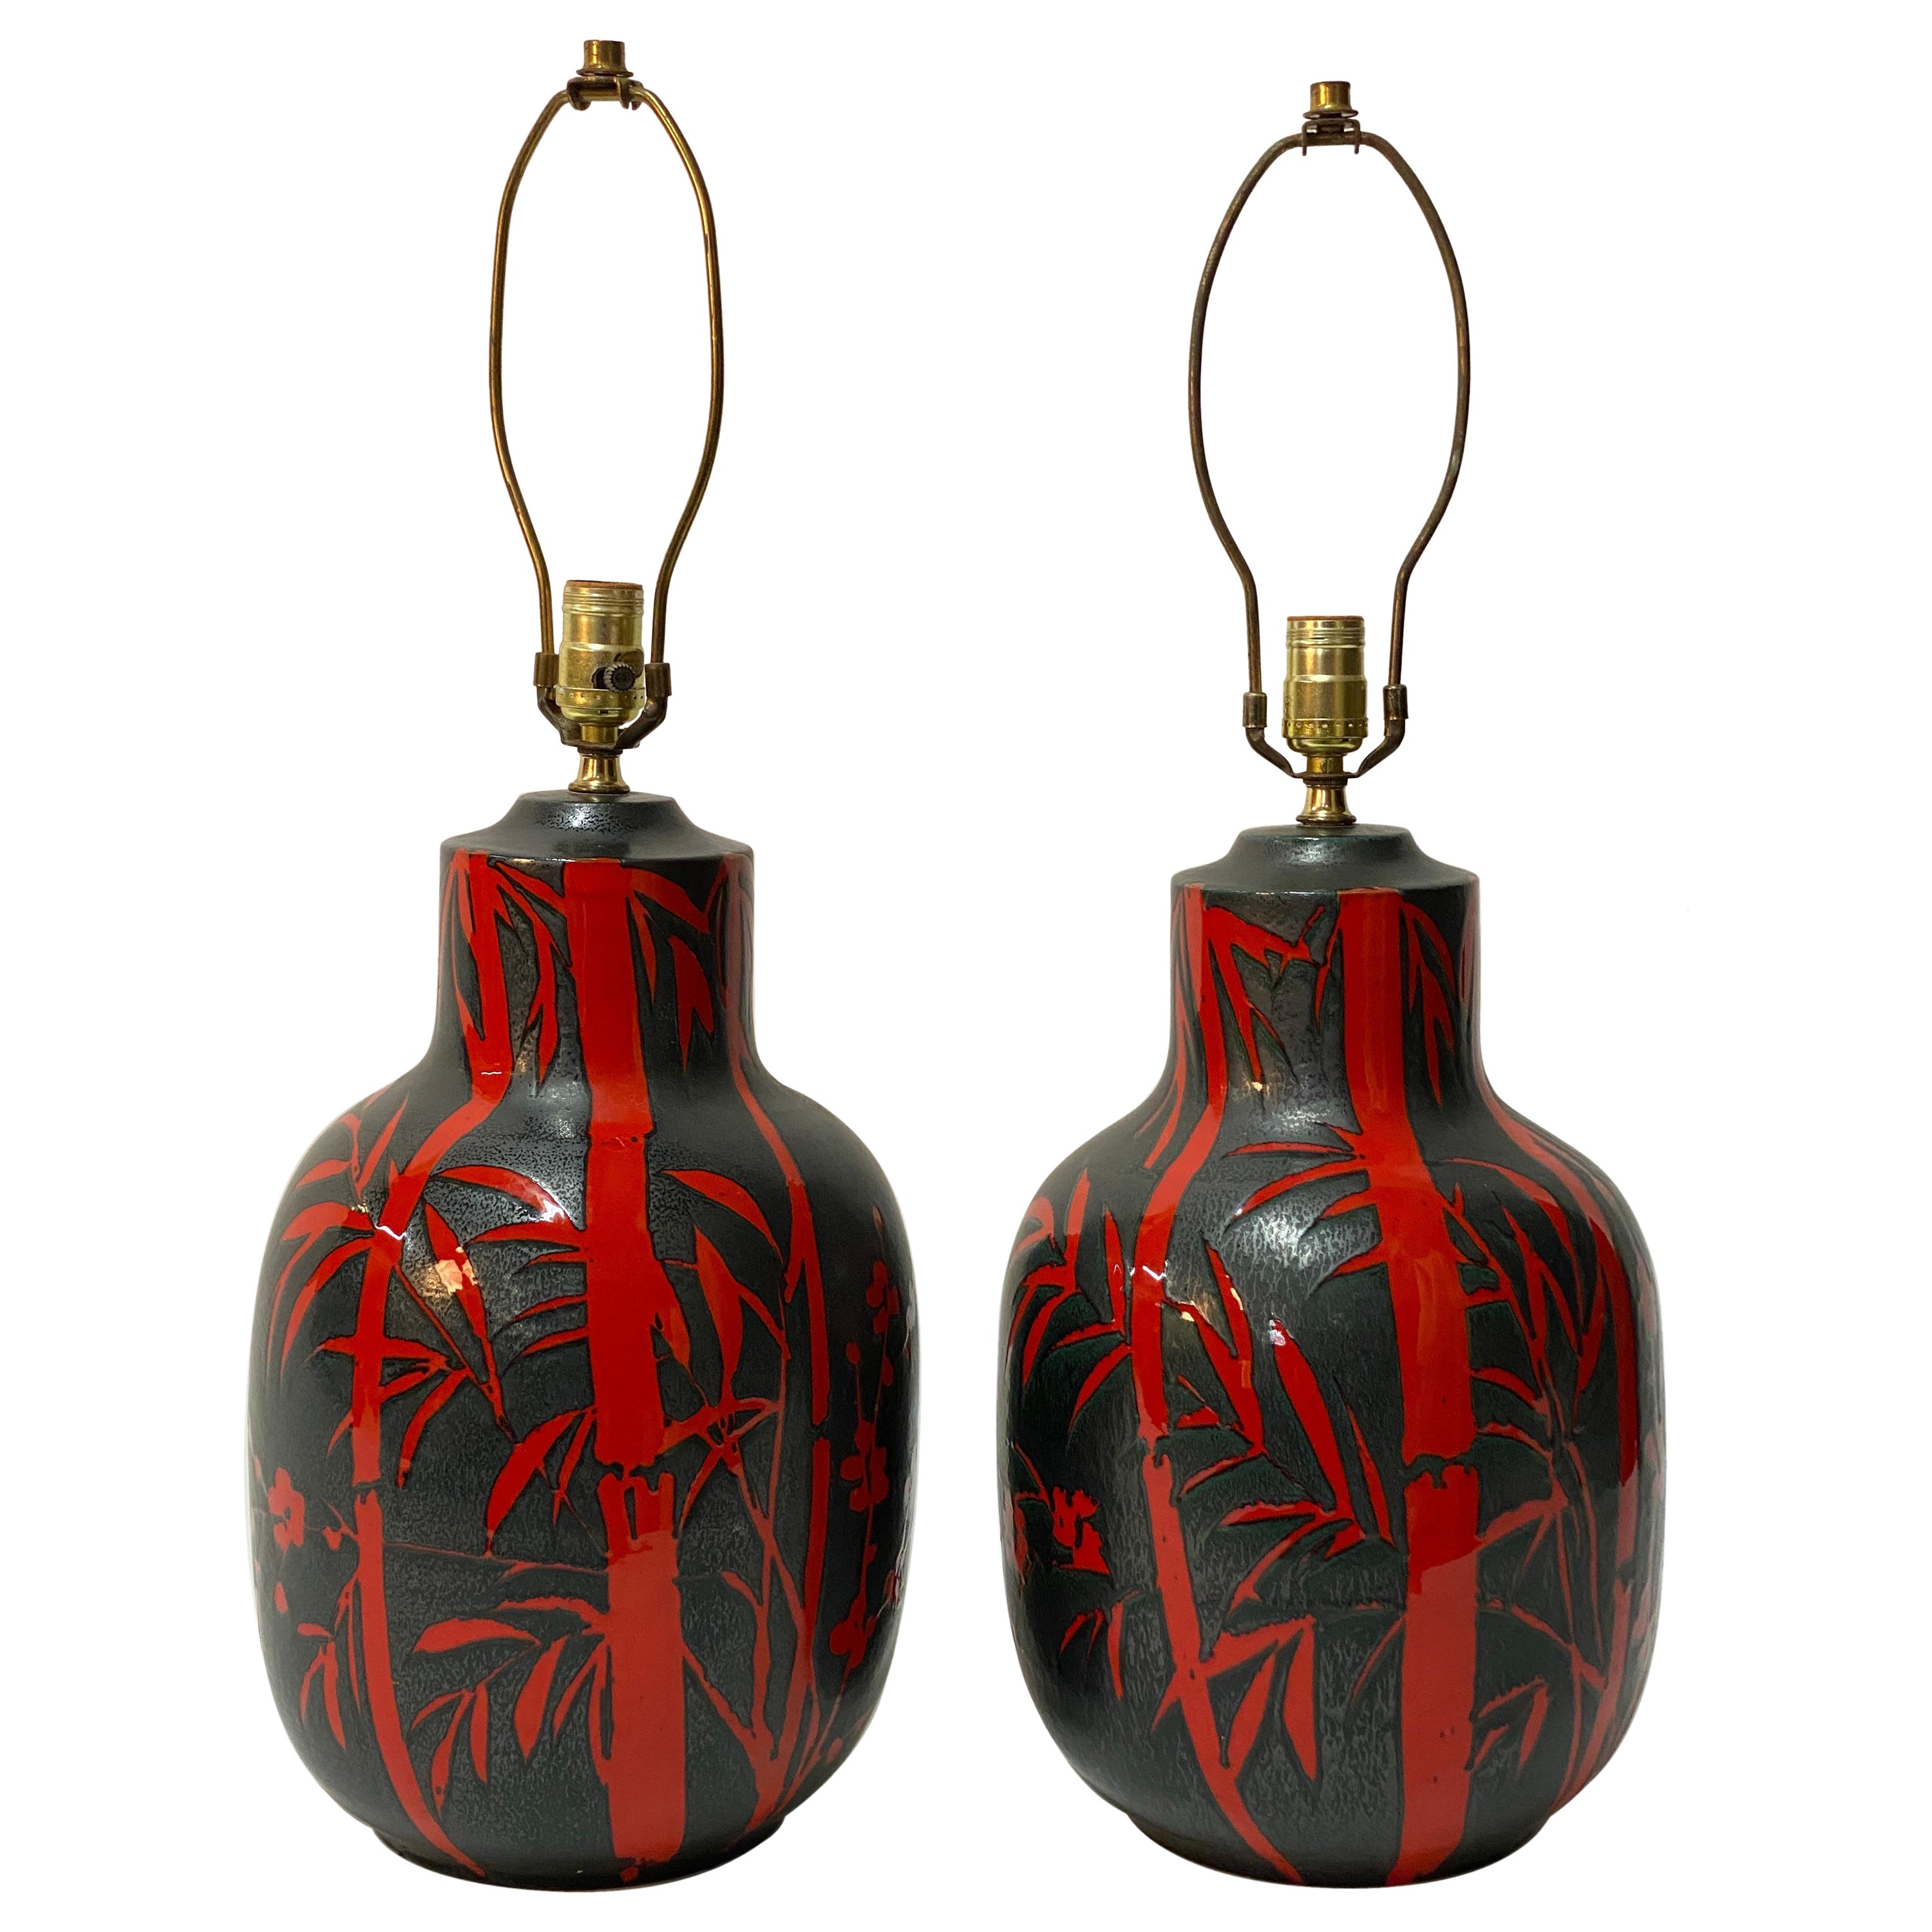 Alvino Bagni Bitossi Bamboo and Butterfly Pottery Table Lamps, Pair For Sale